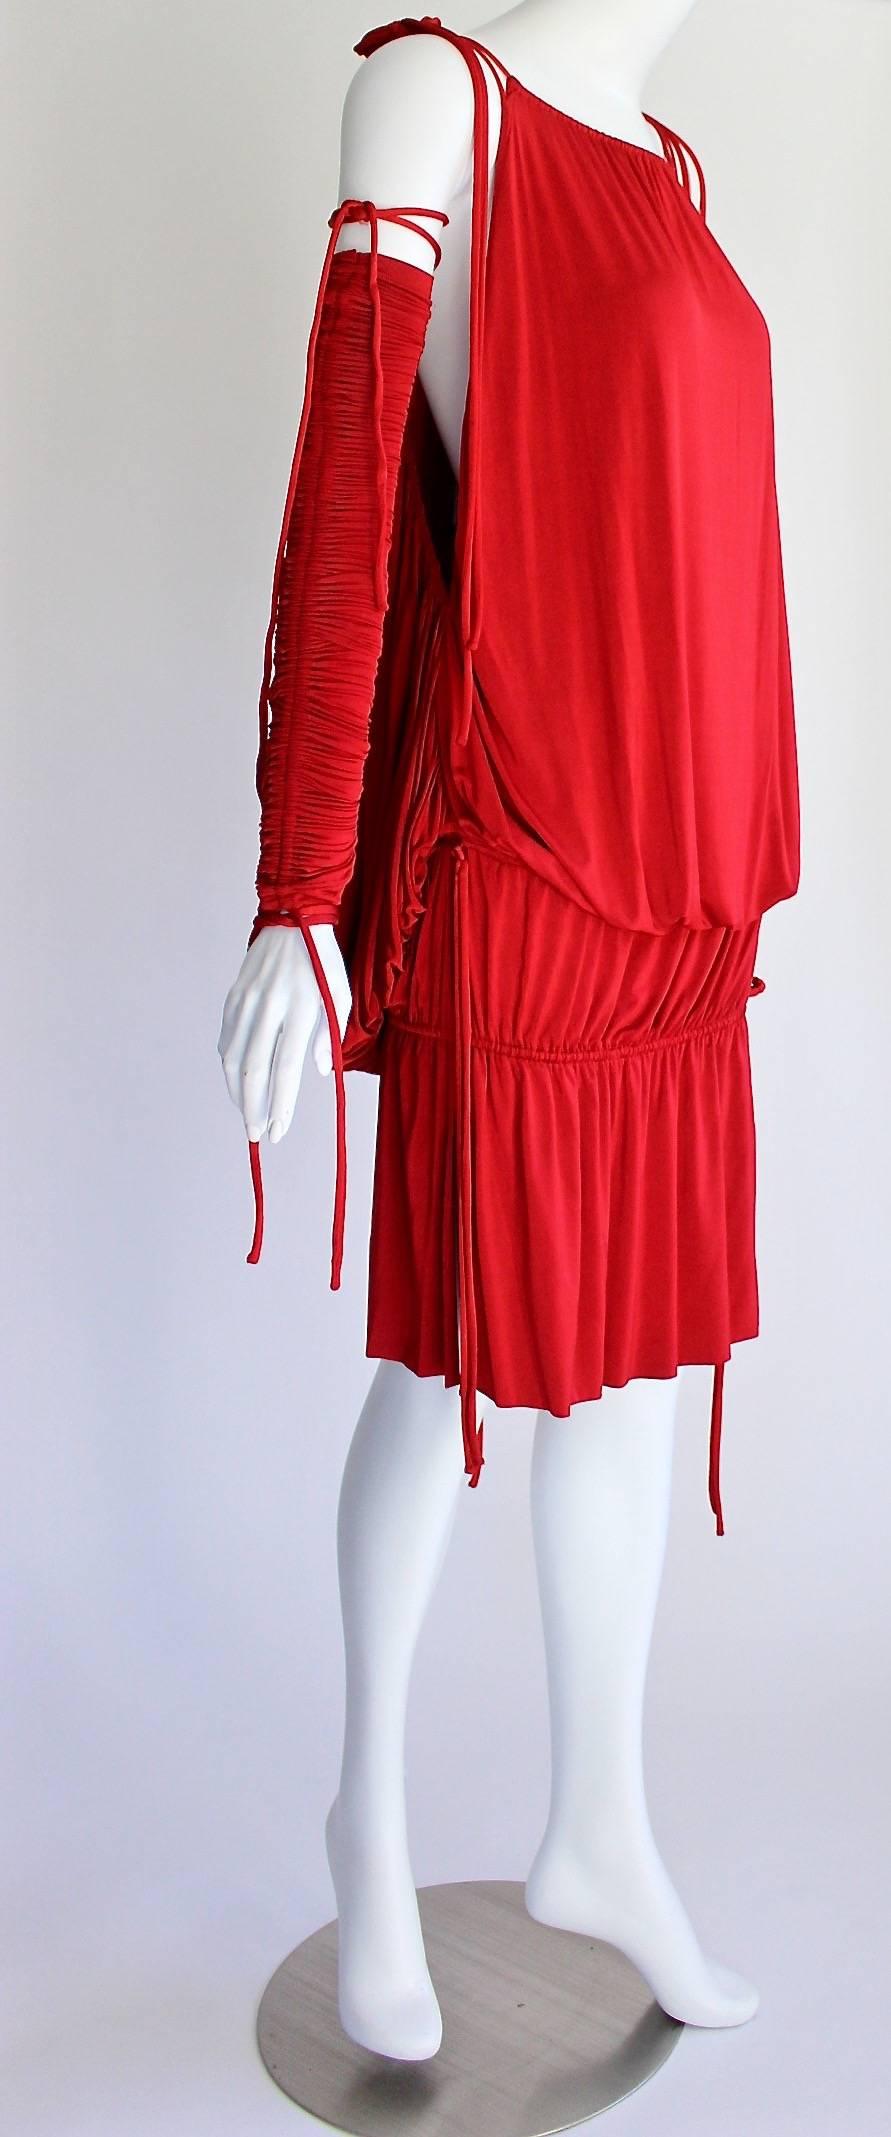  Dolce & Gabbana Runway Ad Campaign Red Mini Dress Ruched Arm Bands, 2003 For Sale 1